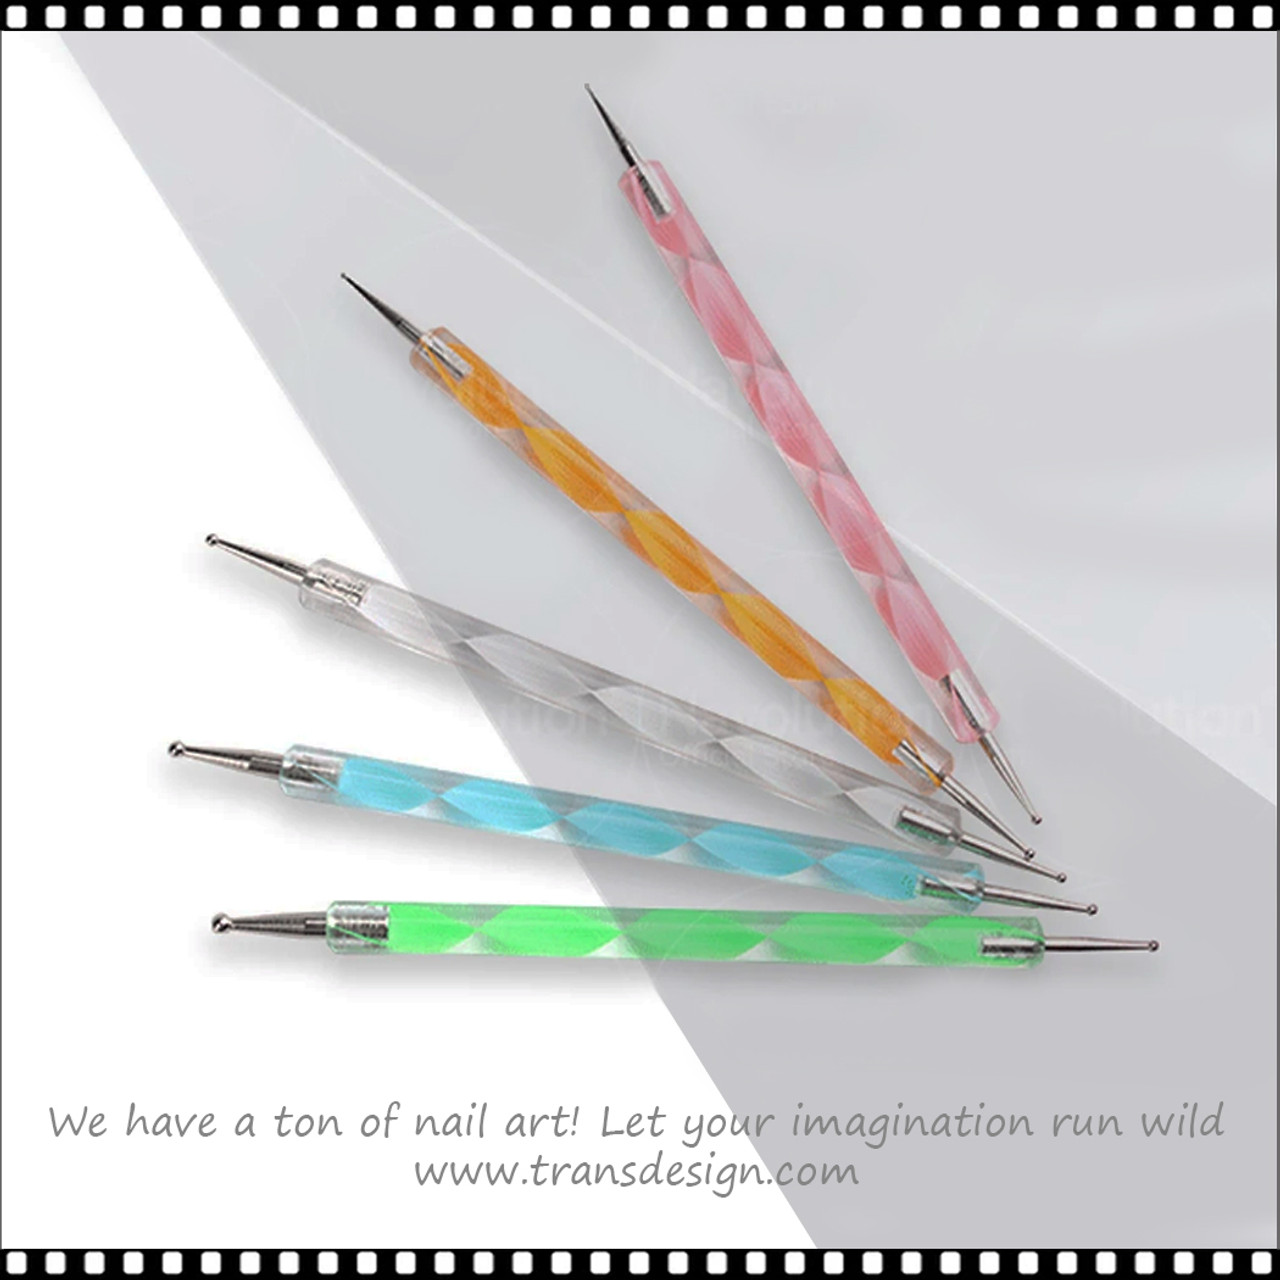 DOTTING TOOL Assorted 10 Size Ball 5/Pack